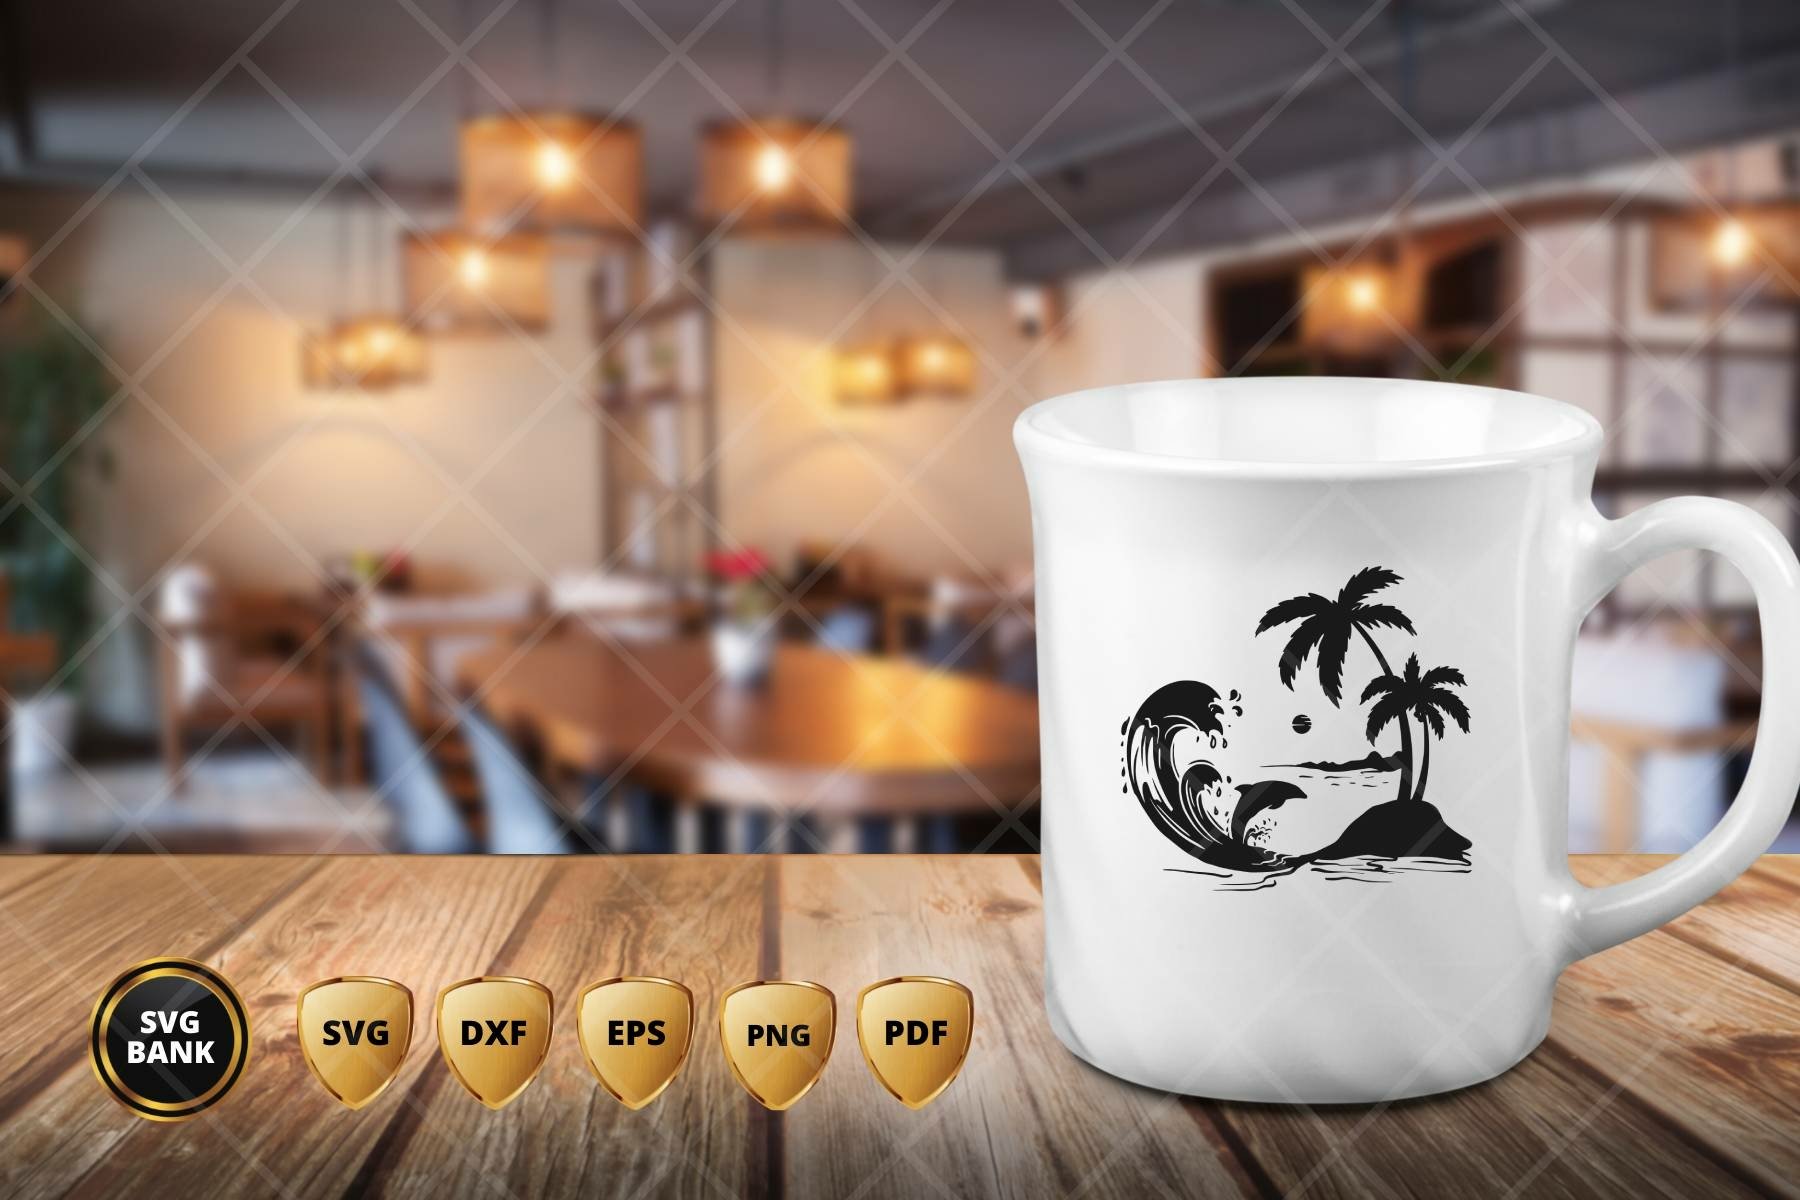 White coffee mug sitting on top of a wooden table.